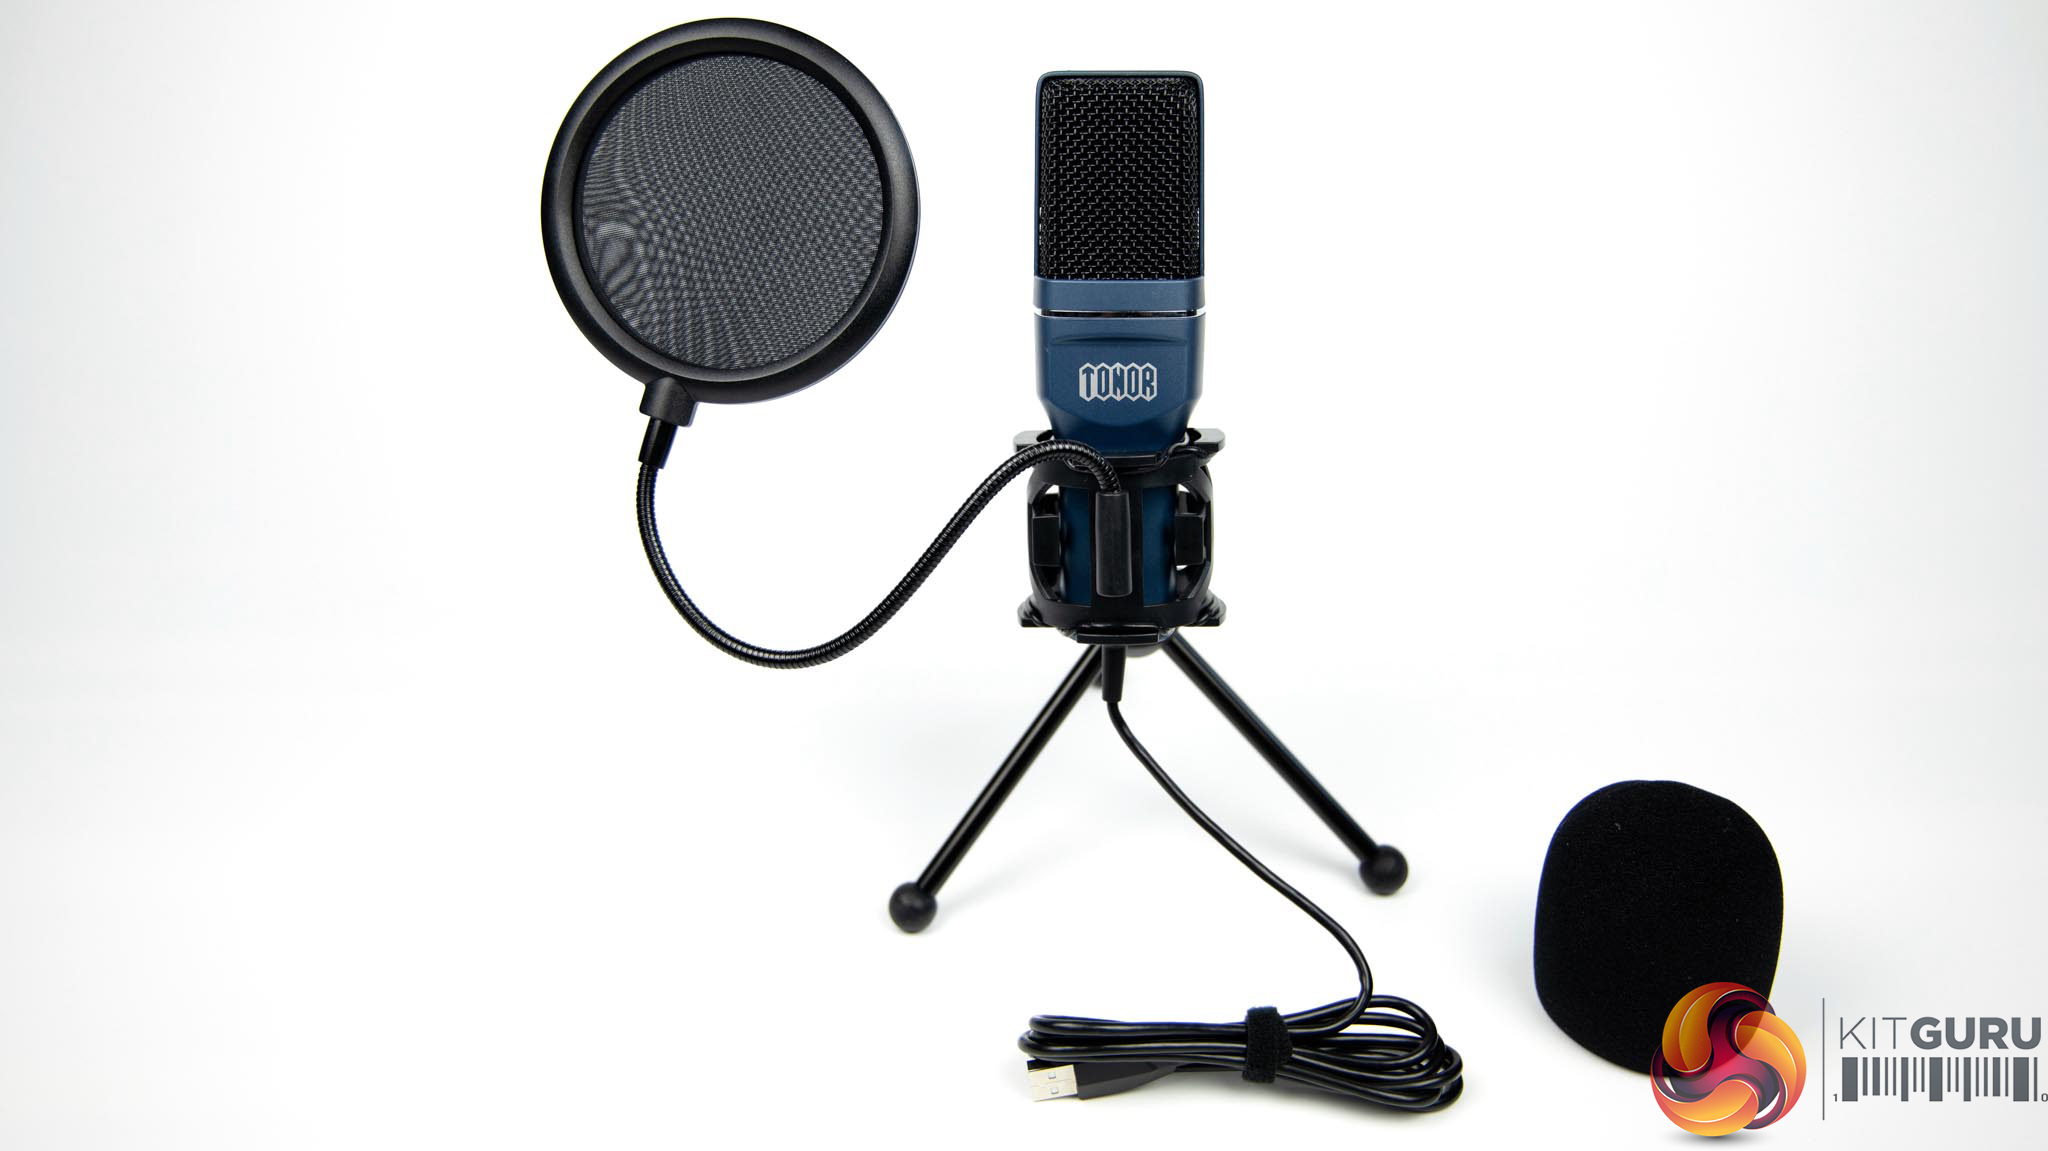 TONOR TC-777 Microphone - Good Performance at a Great Price